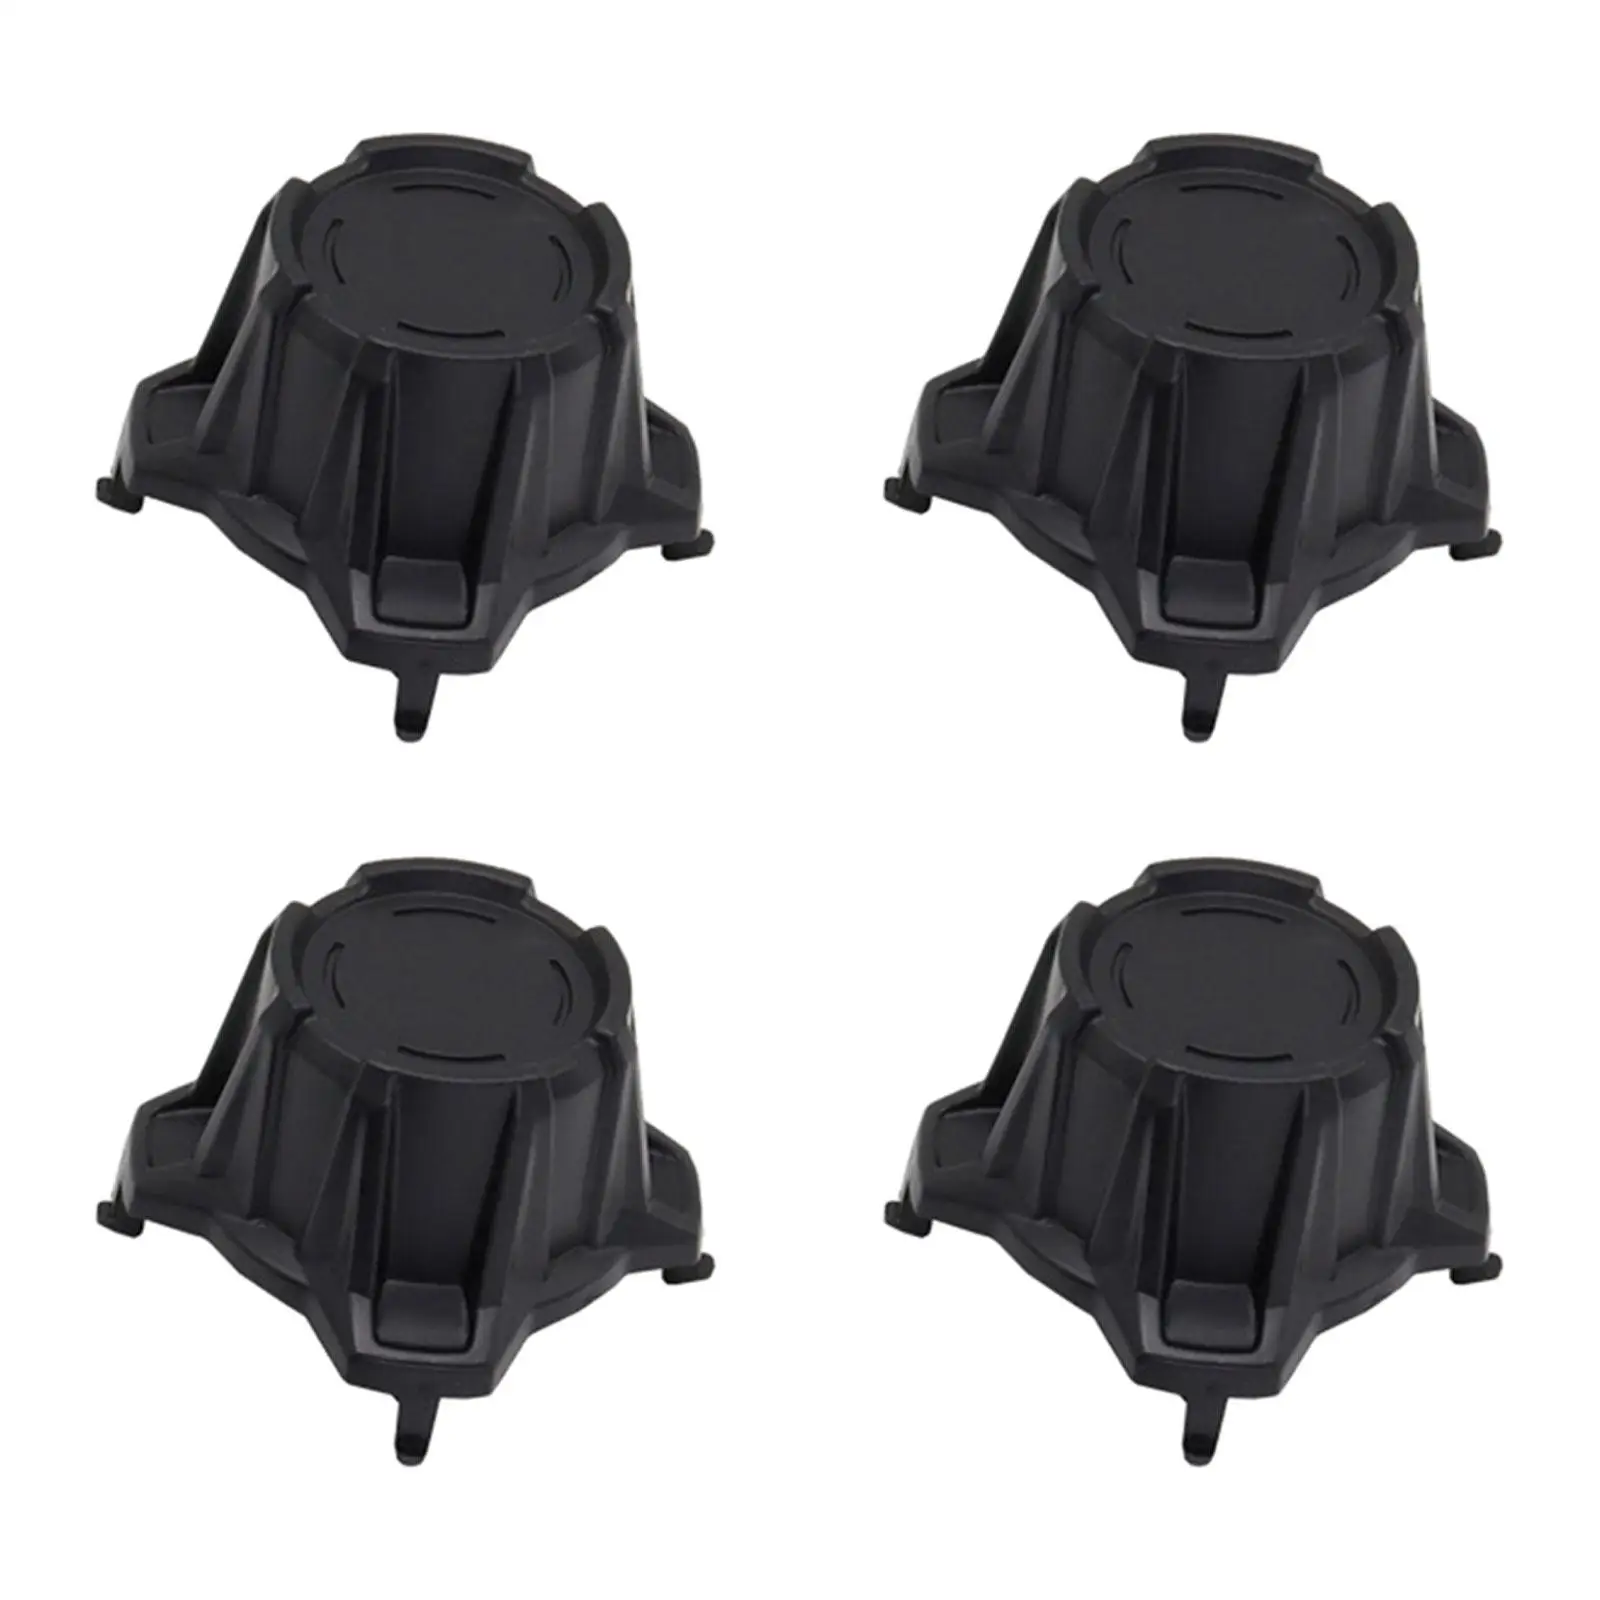 4x Tire Wheel Hub Caps Motorcycle Easy to Install Repair Parts Cap Cover for x3